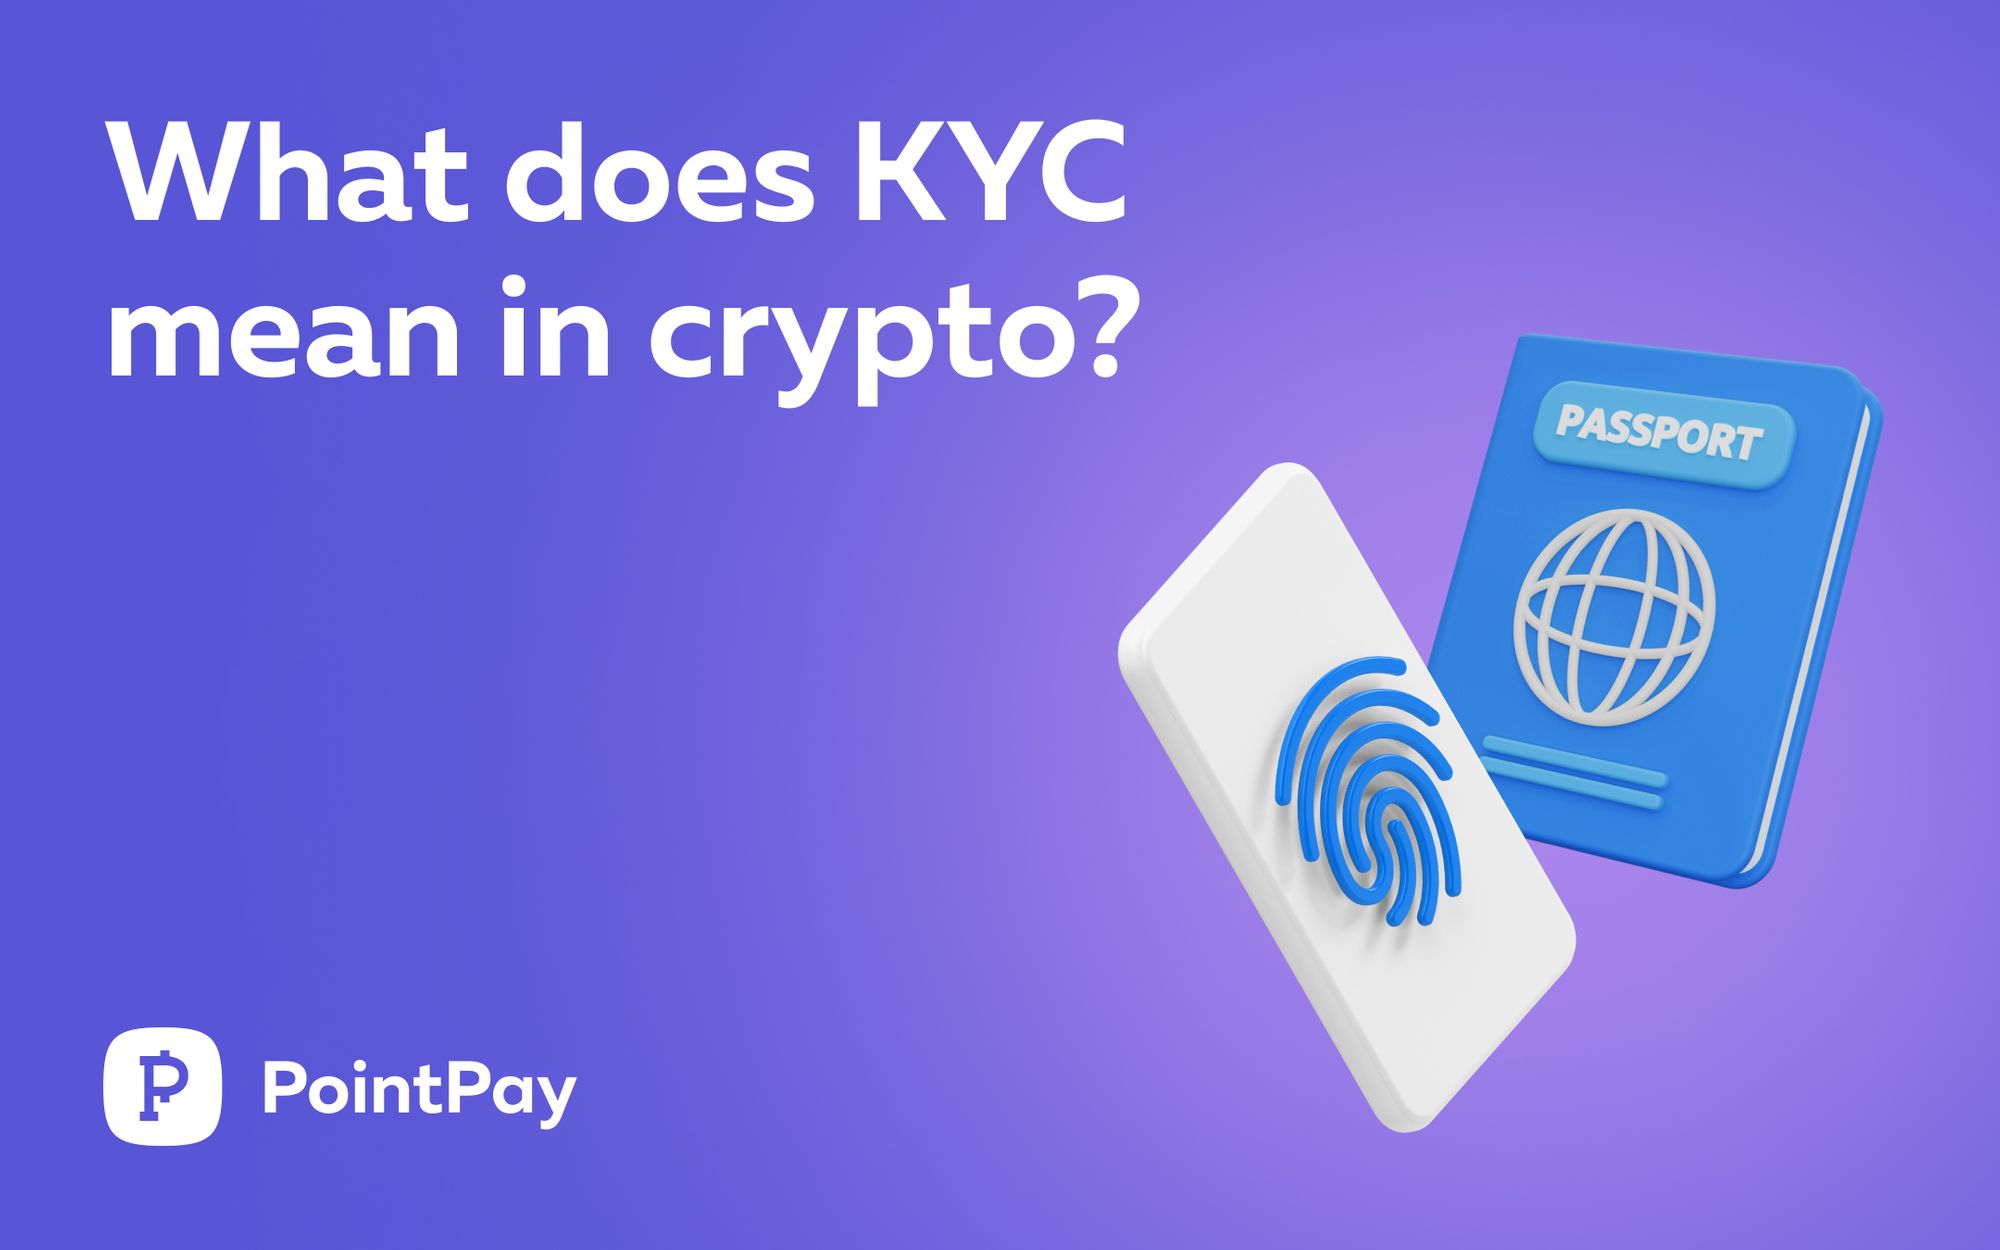 kyc and cryptocurrency